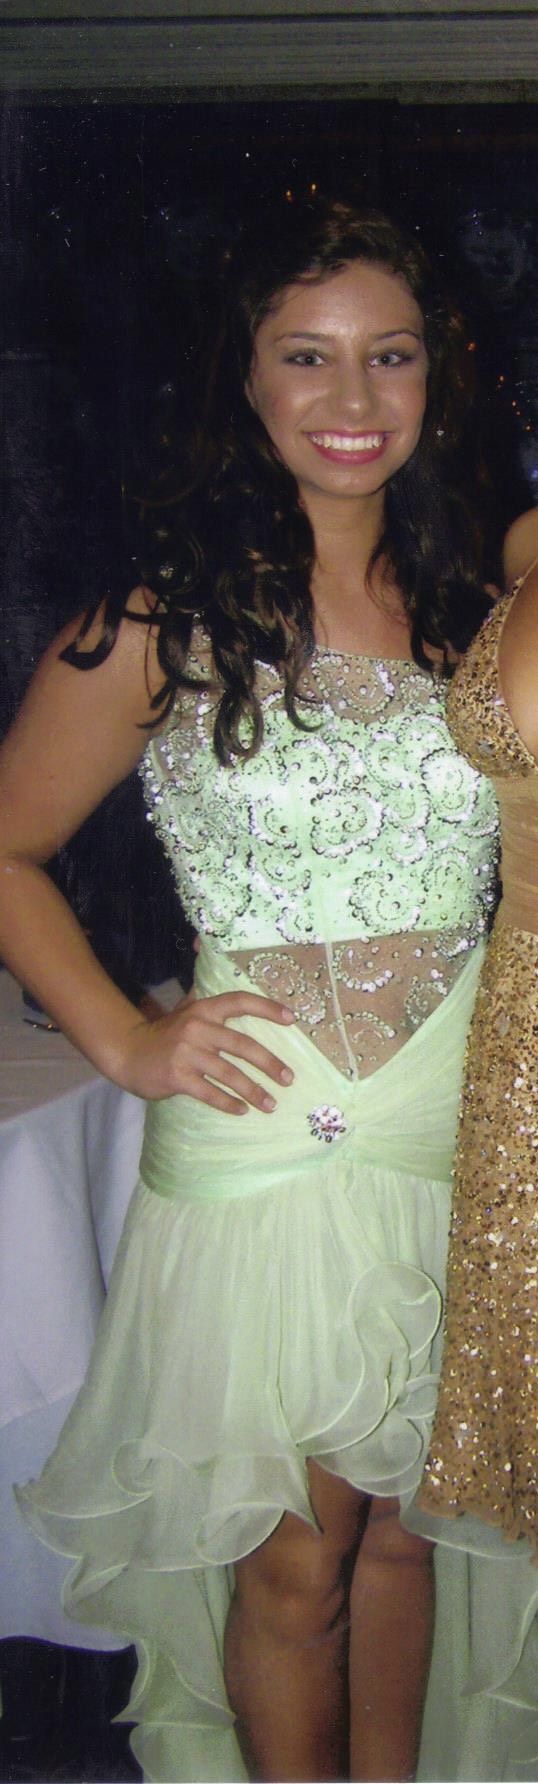 Excite prom Size 2 Prom Strapless Sheer Light Green Cocktail Dress on Queenly